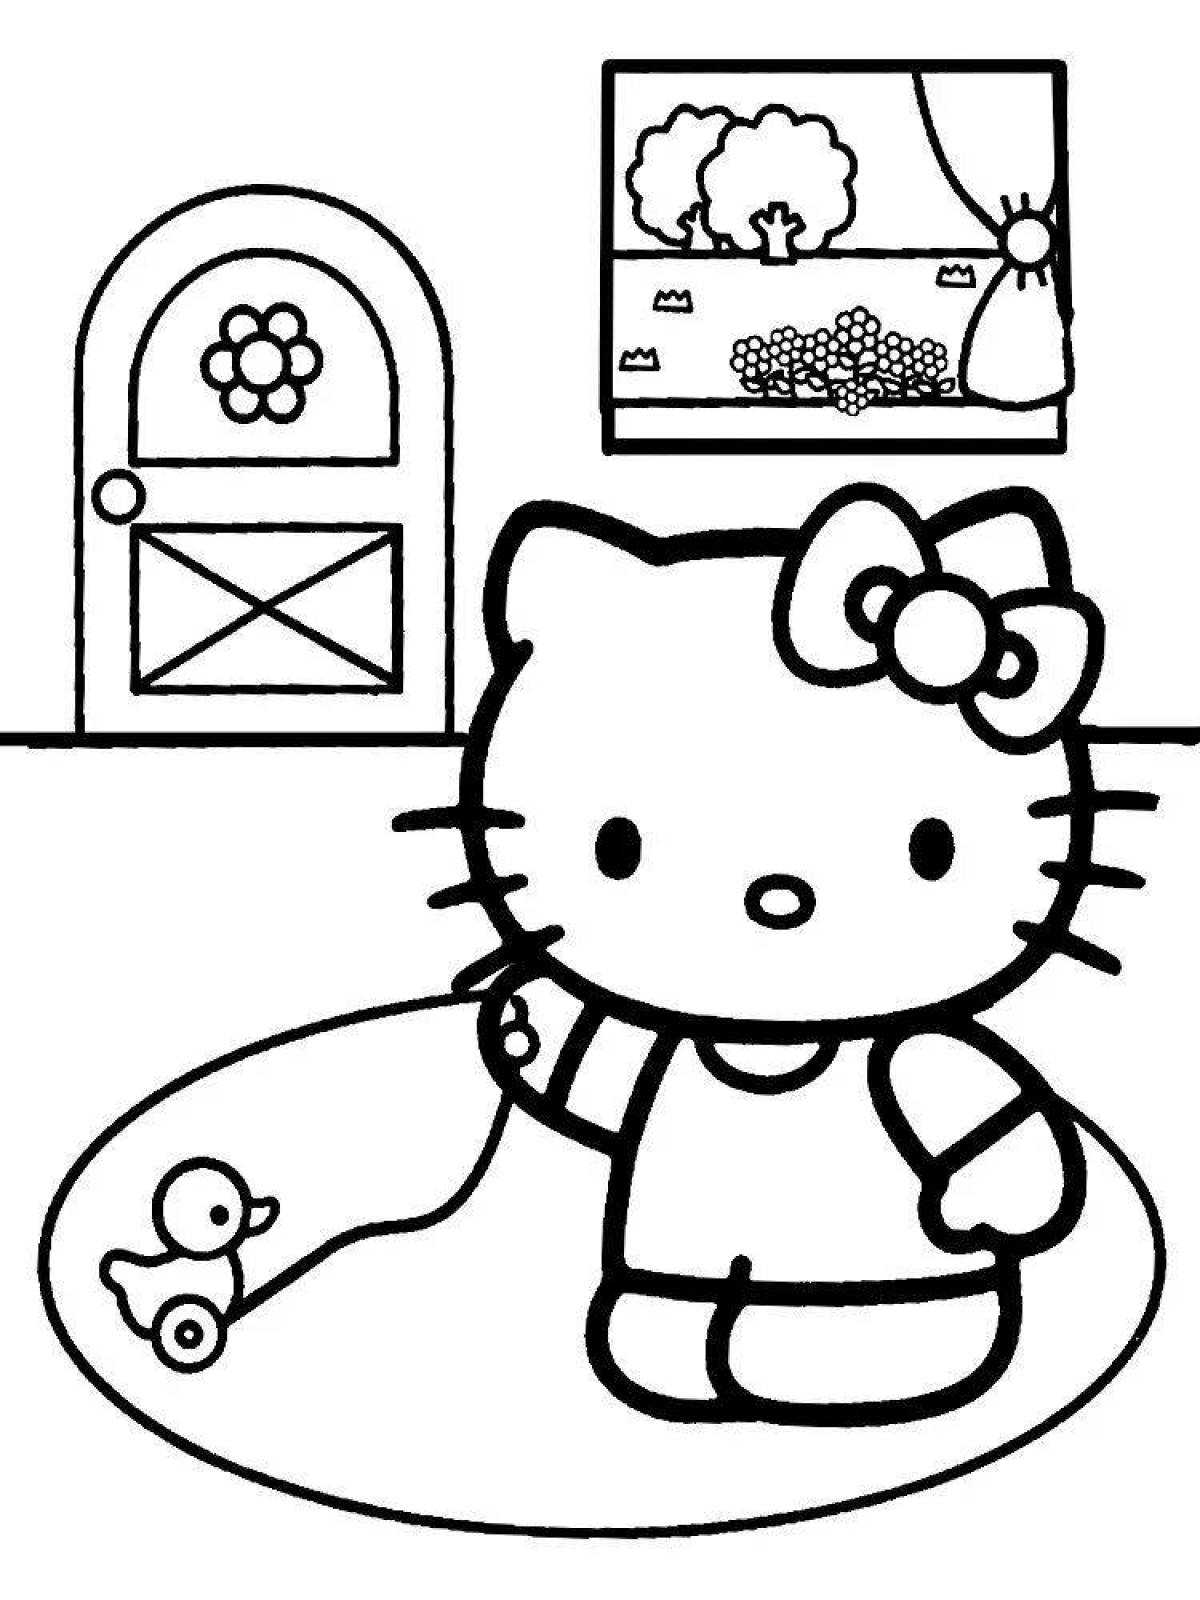 Coloring hello kitty for kids